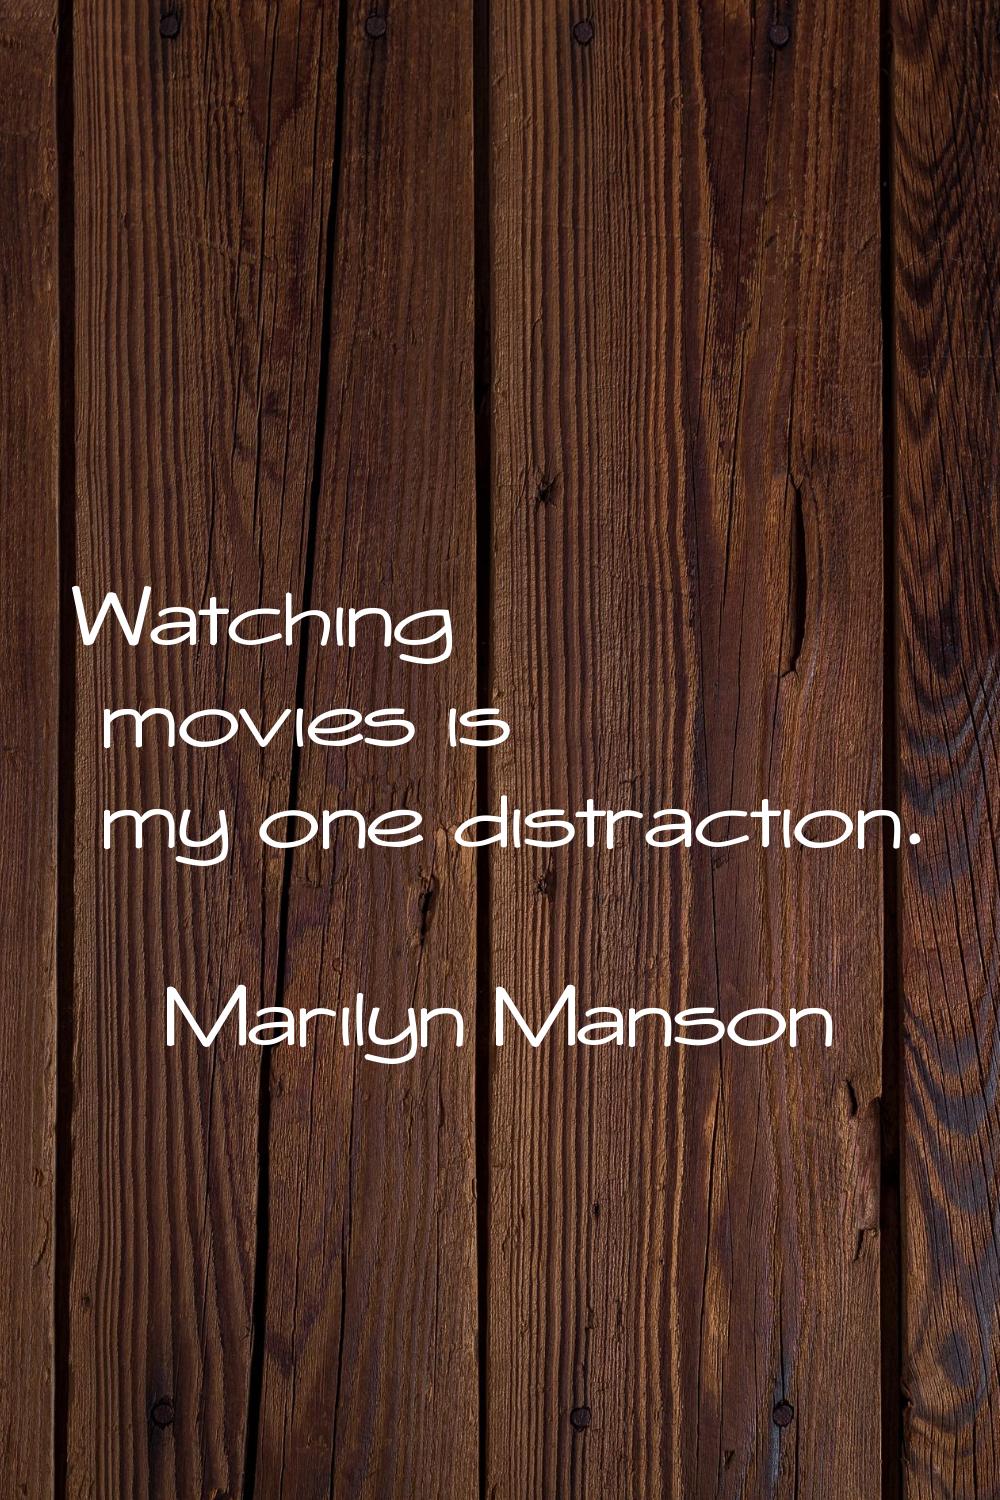 Watching movies is my one distraction.